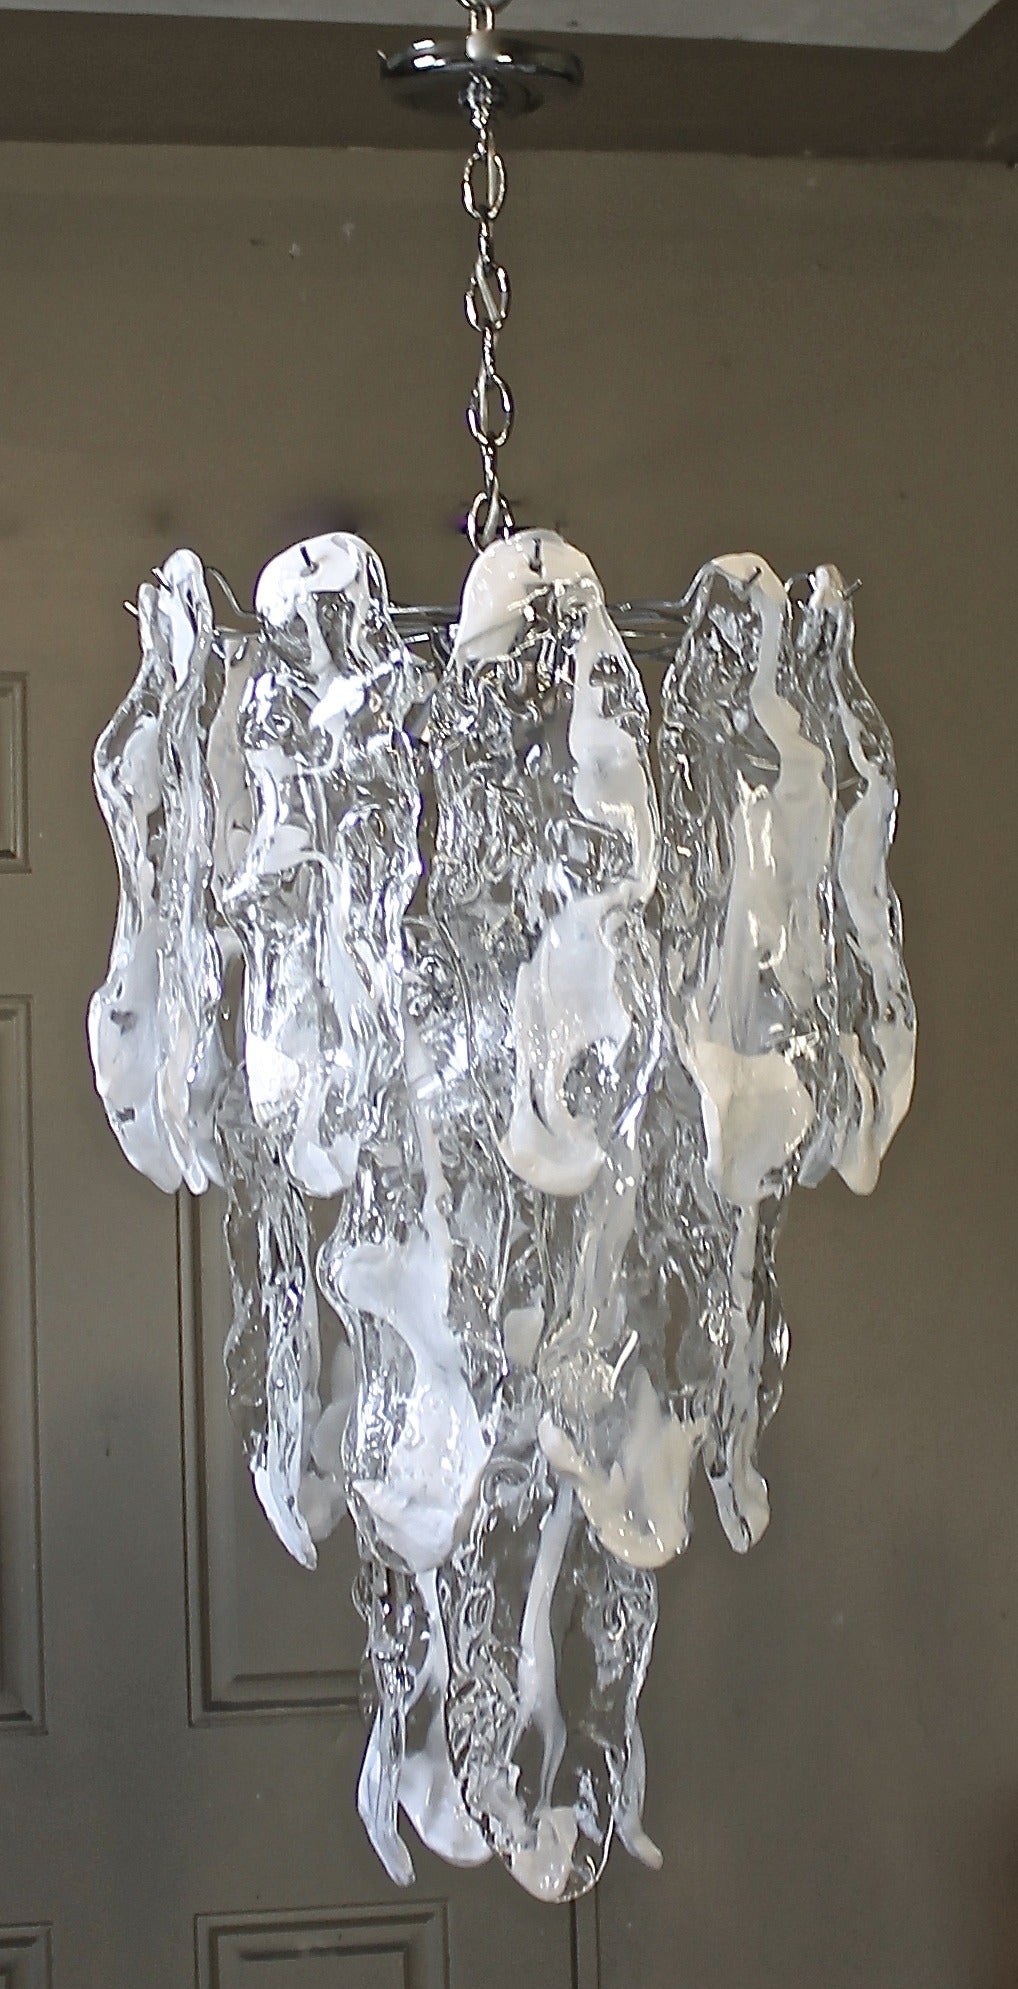 Large clear and white glass icicle shape panels by Mazzega, Murano Italy. Newly chrome plated frame with 9 - 40 watt max candelabra base size bulbs, newly wired. Overall height including chain and ceiling canopy is 44